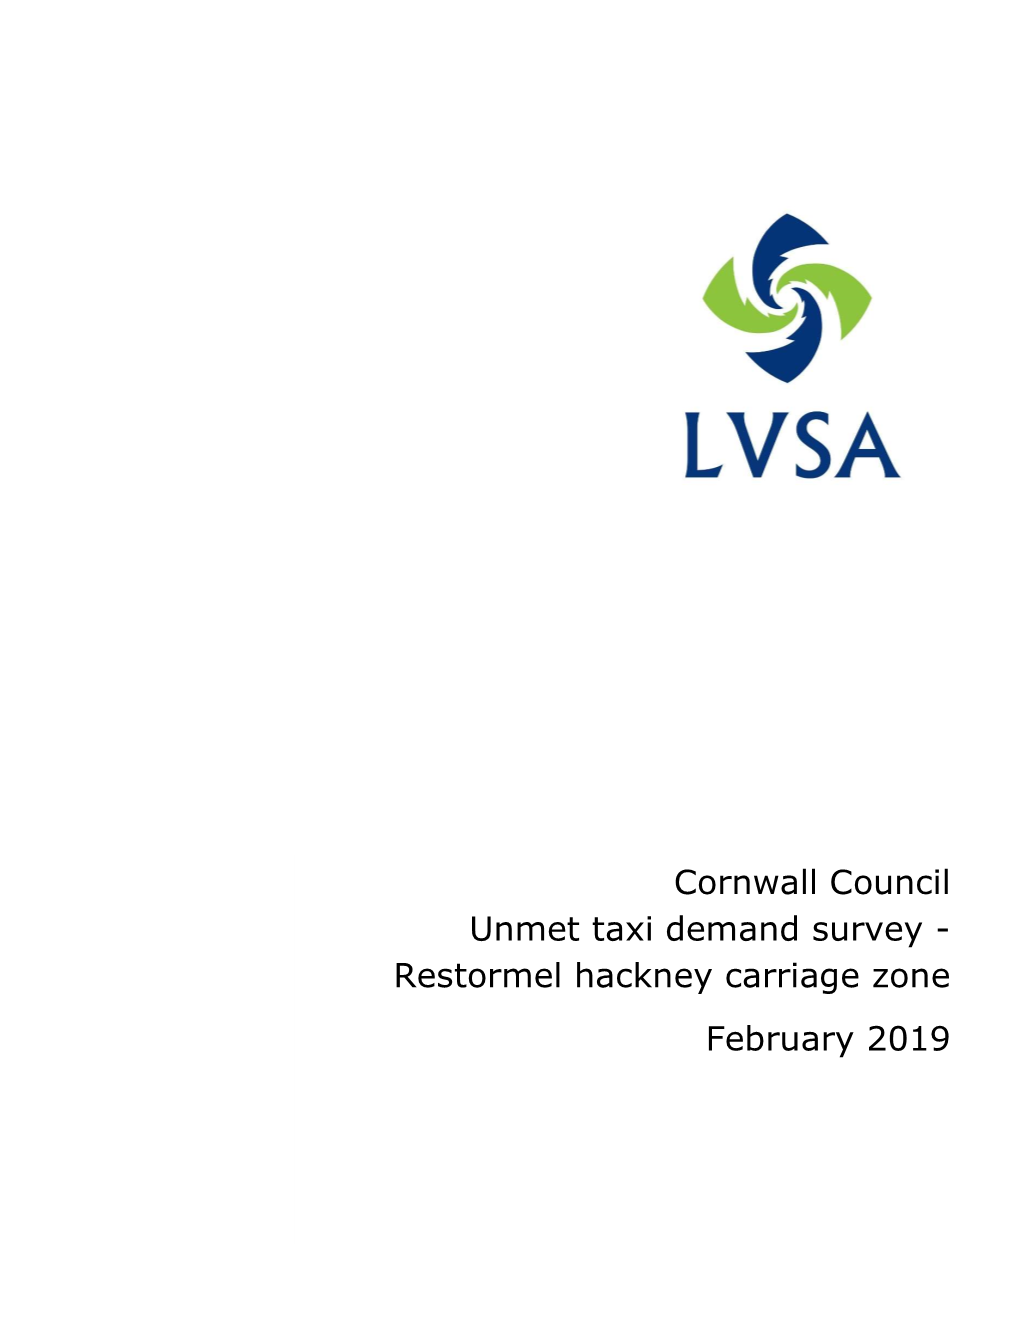 Cornwall Council Unmet Taxi Demand Survey - Restormel Hackney Carriage Zone February 2019